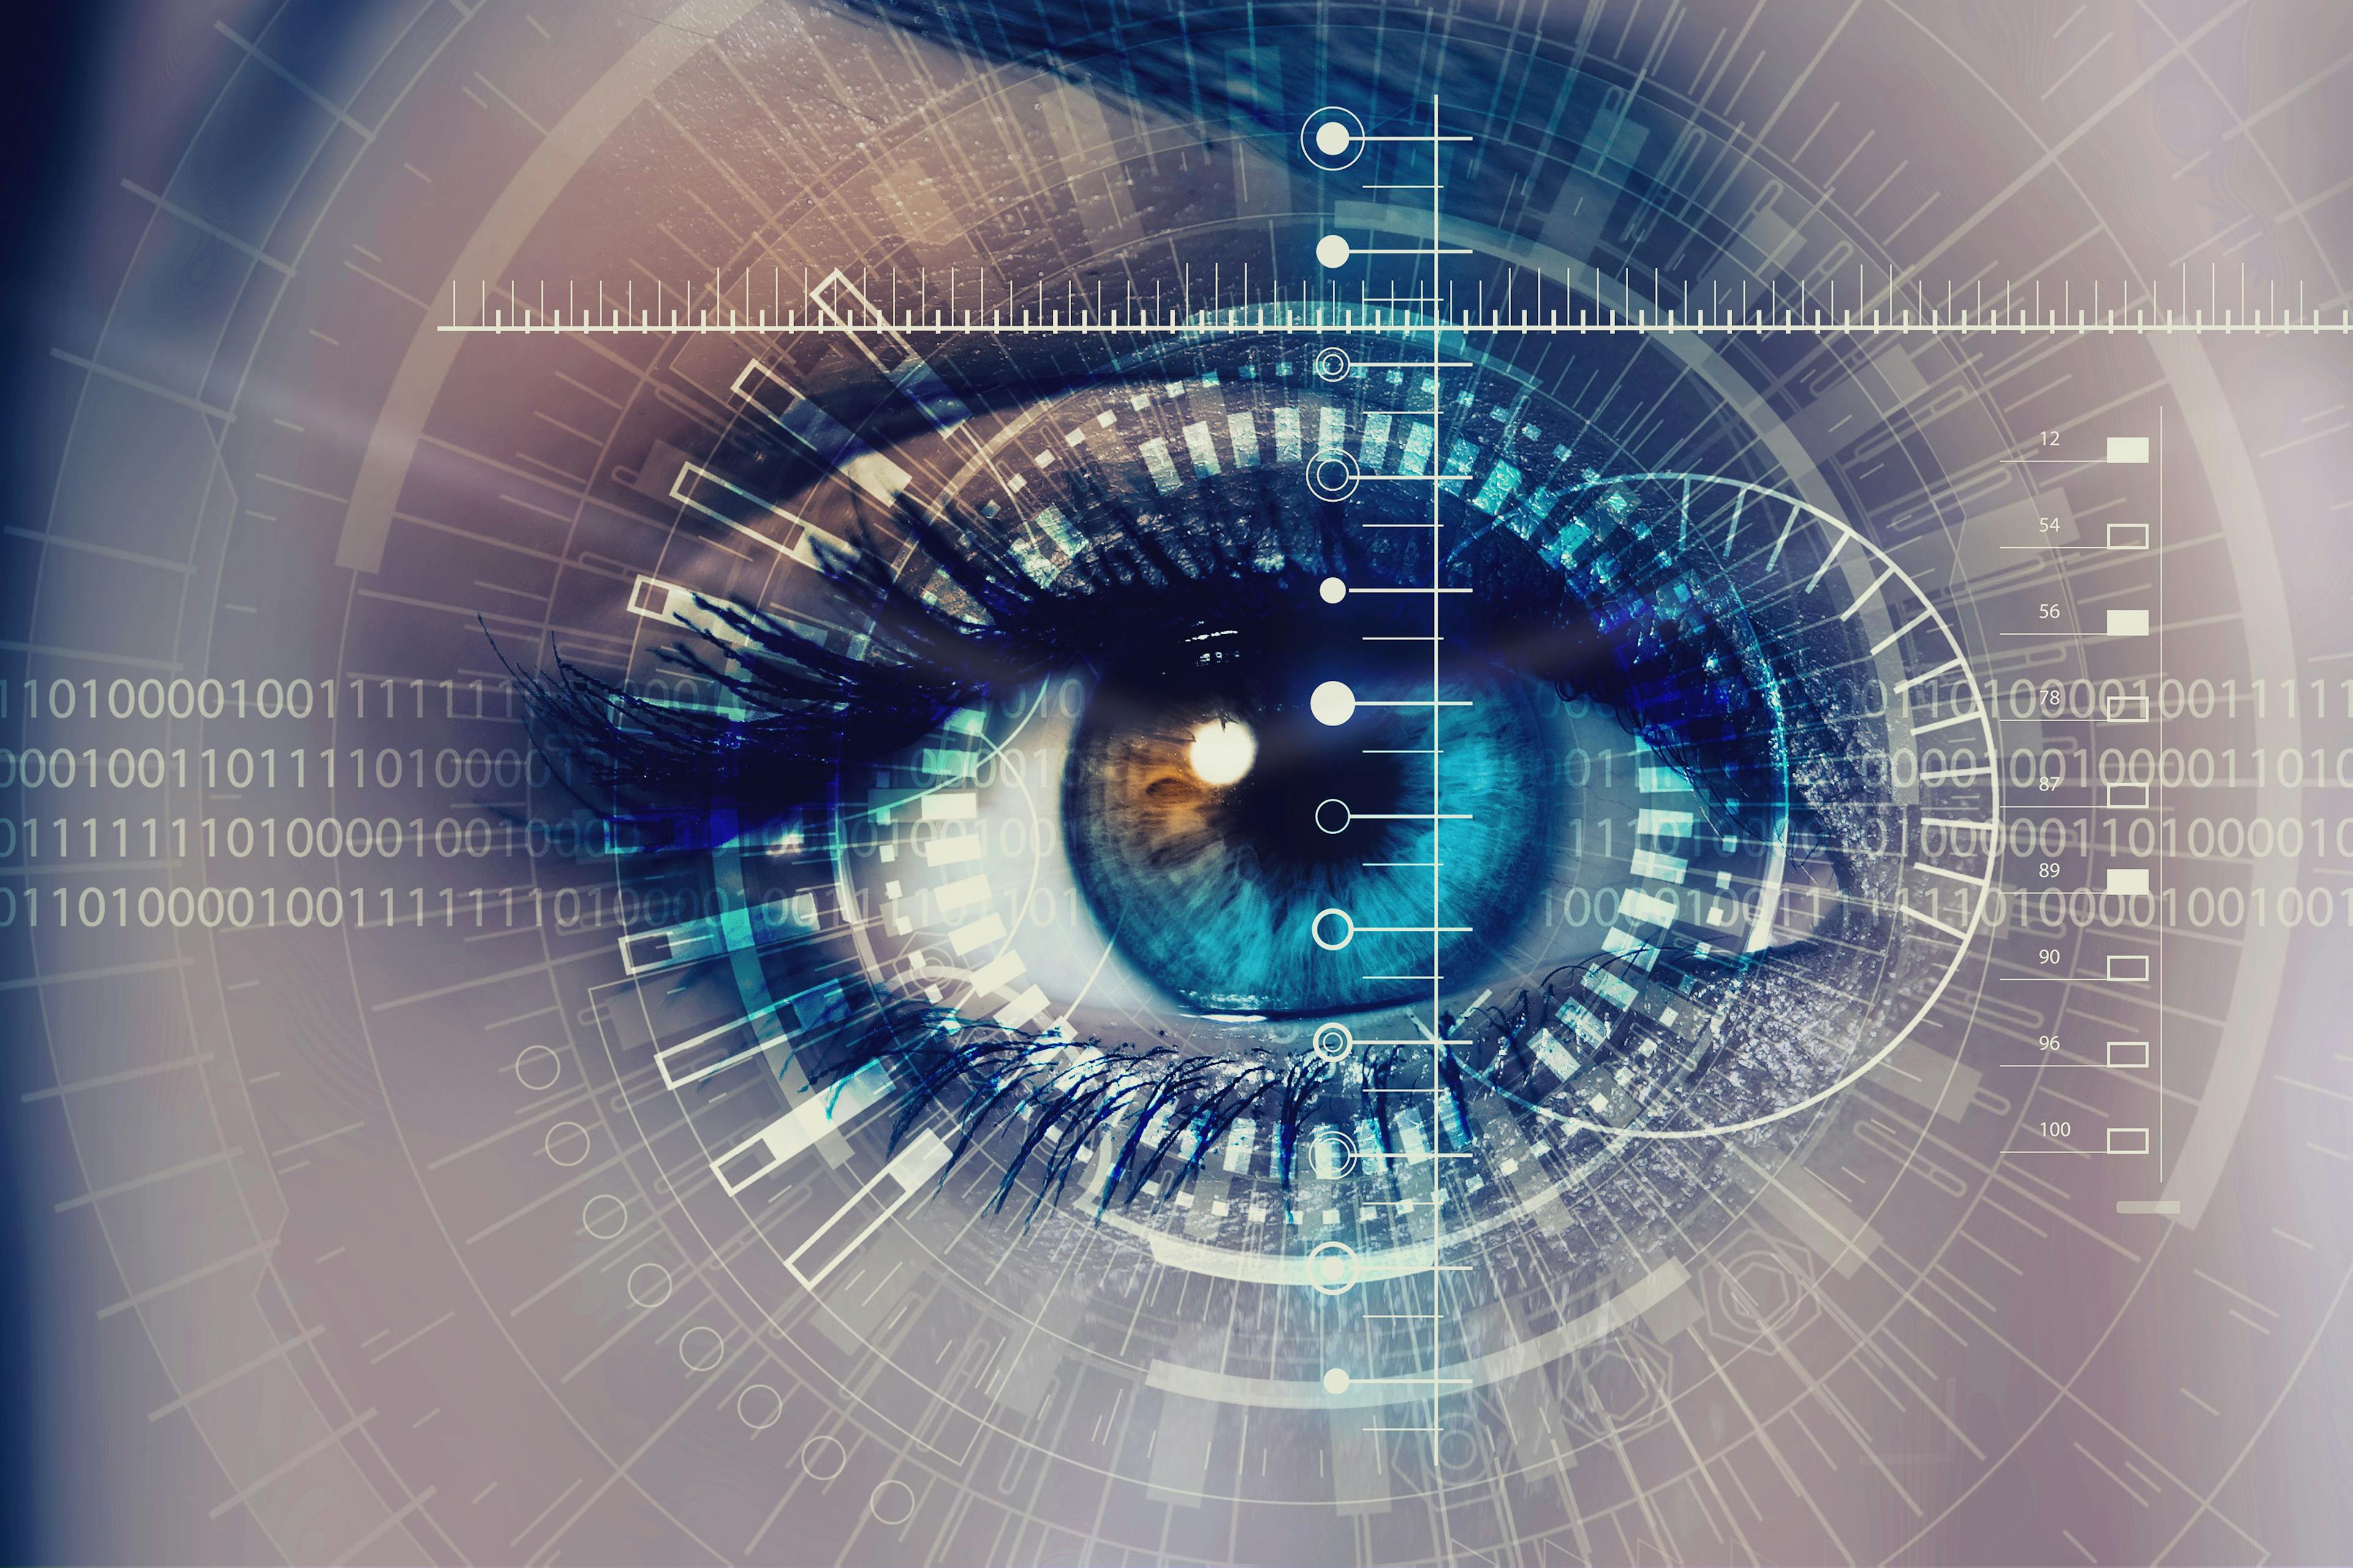 Image of a person's eye with graphics of technology on top.